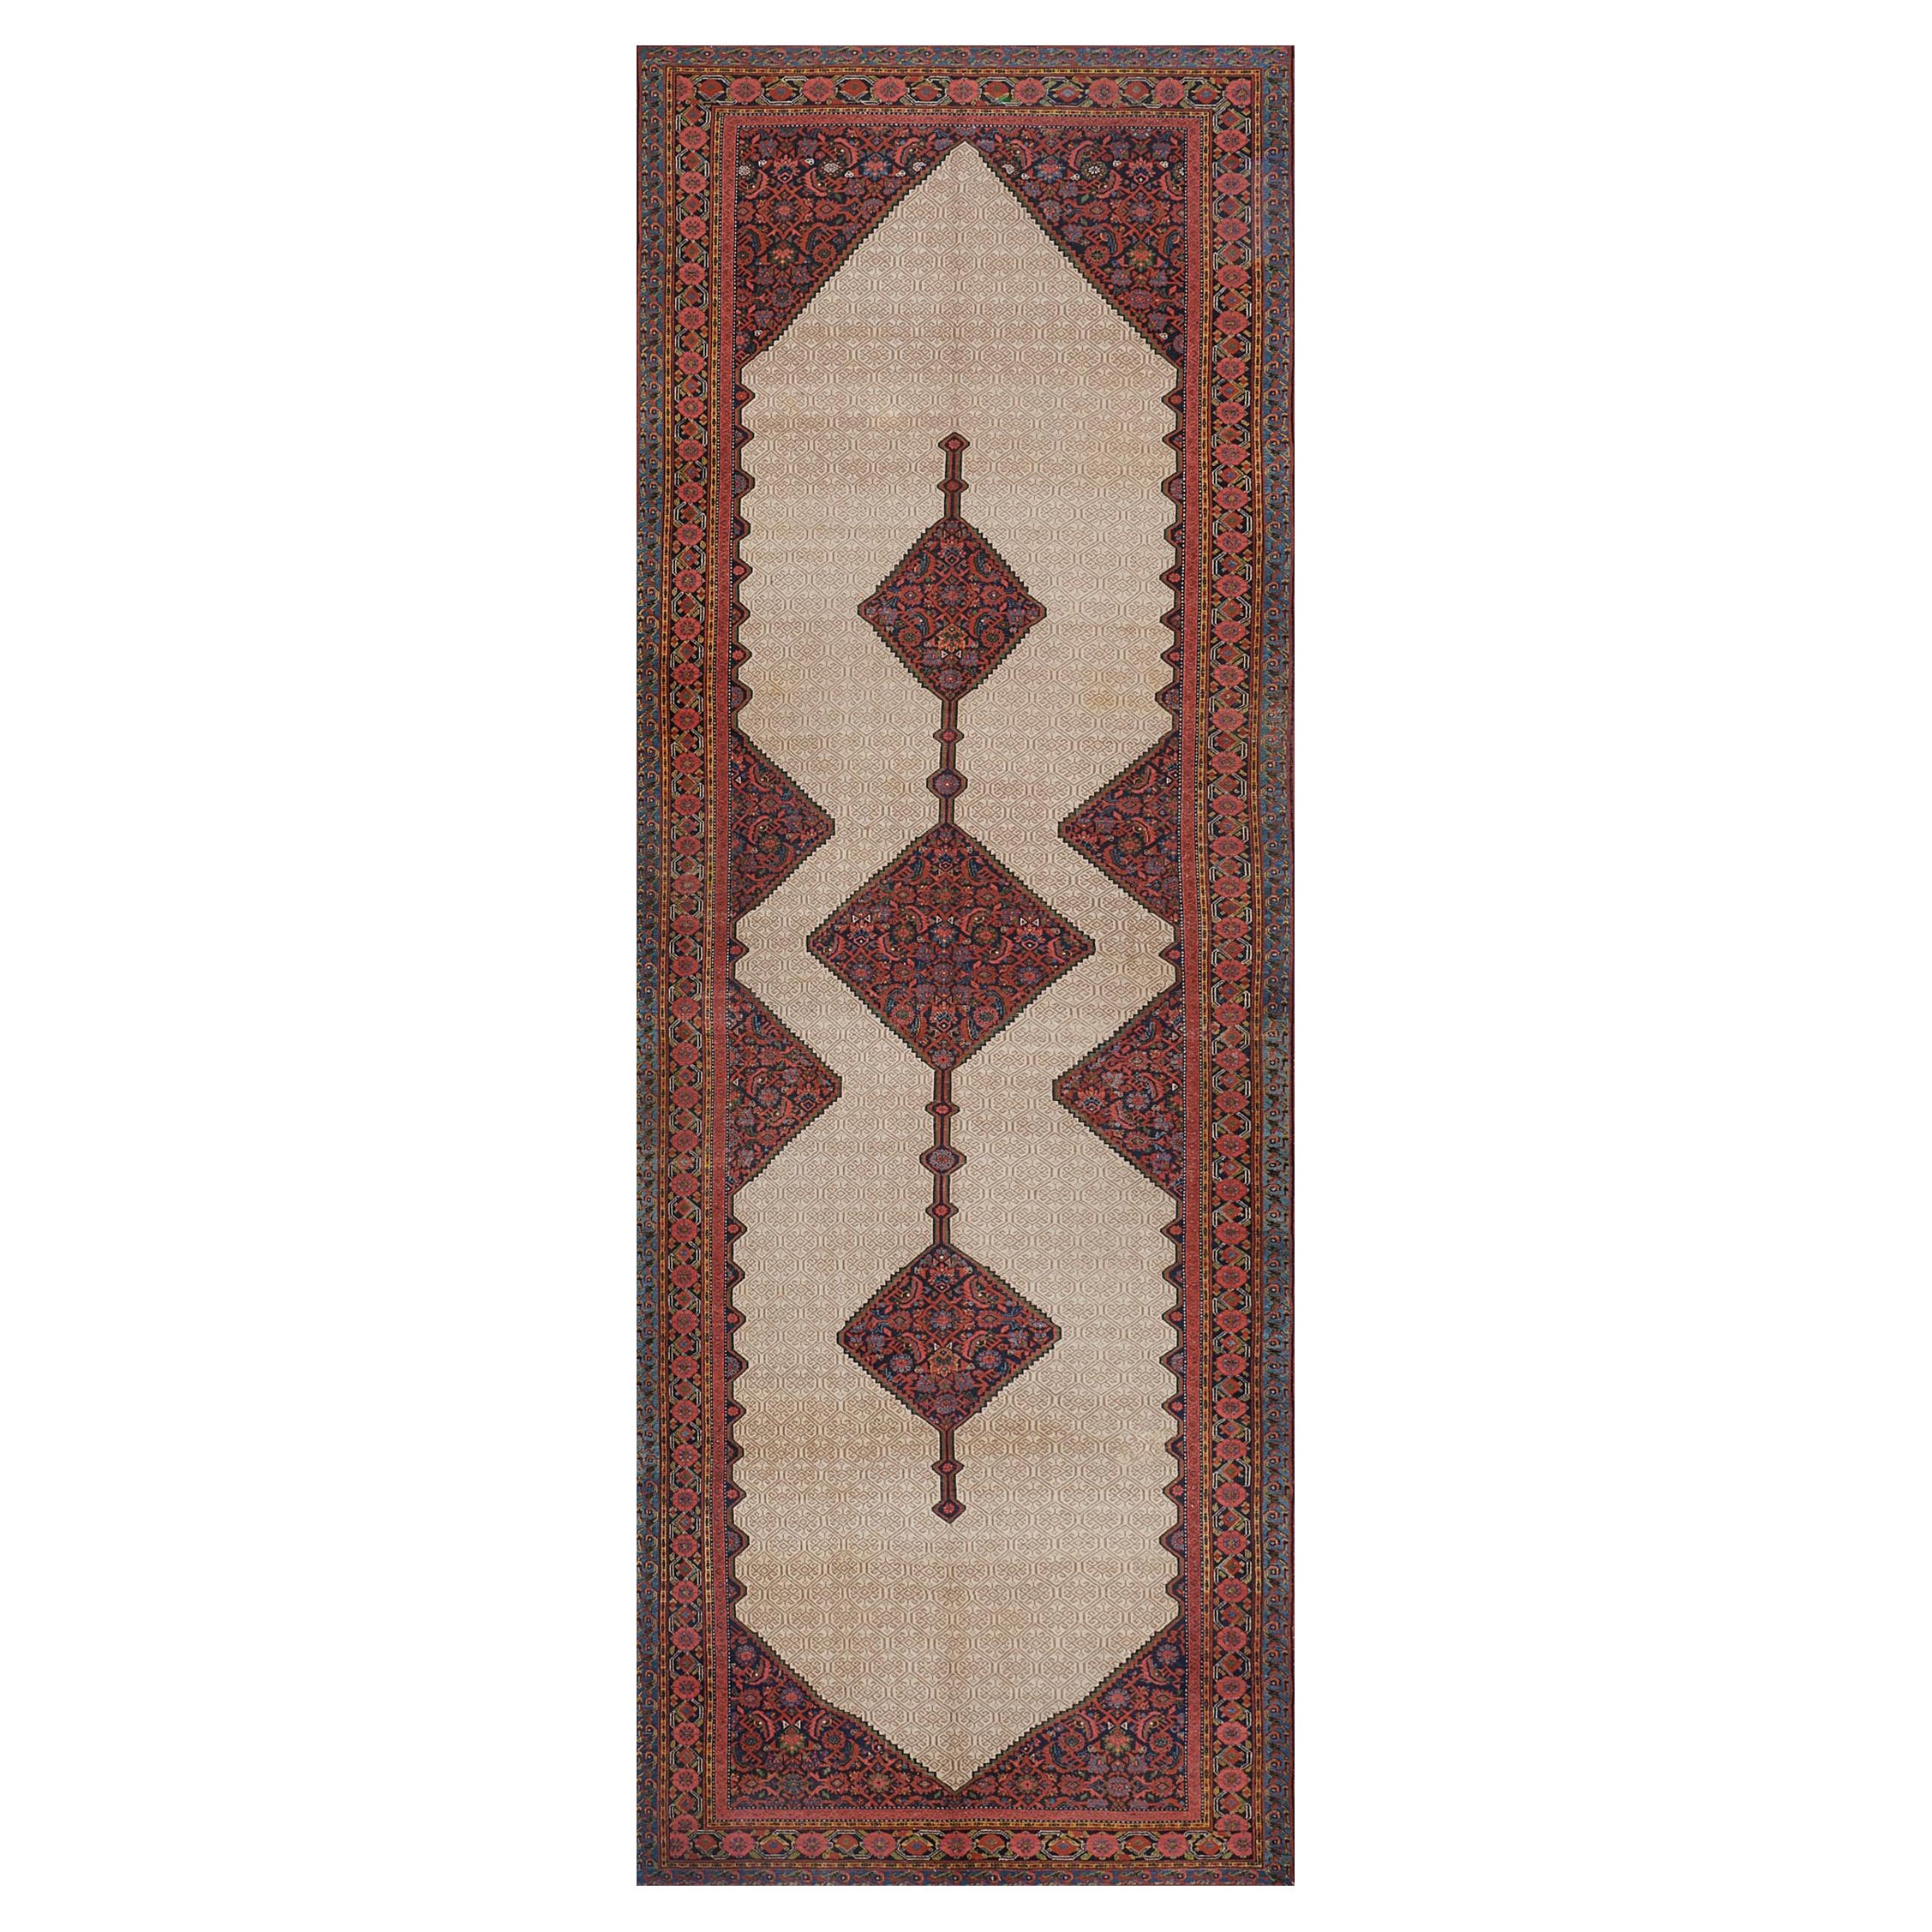 Traditional Antique Circa-1900 Wool Persian Serab Runner 7'9"x19'6" For Sale